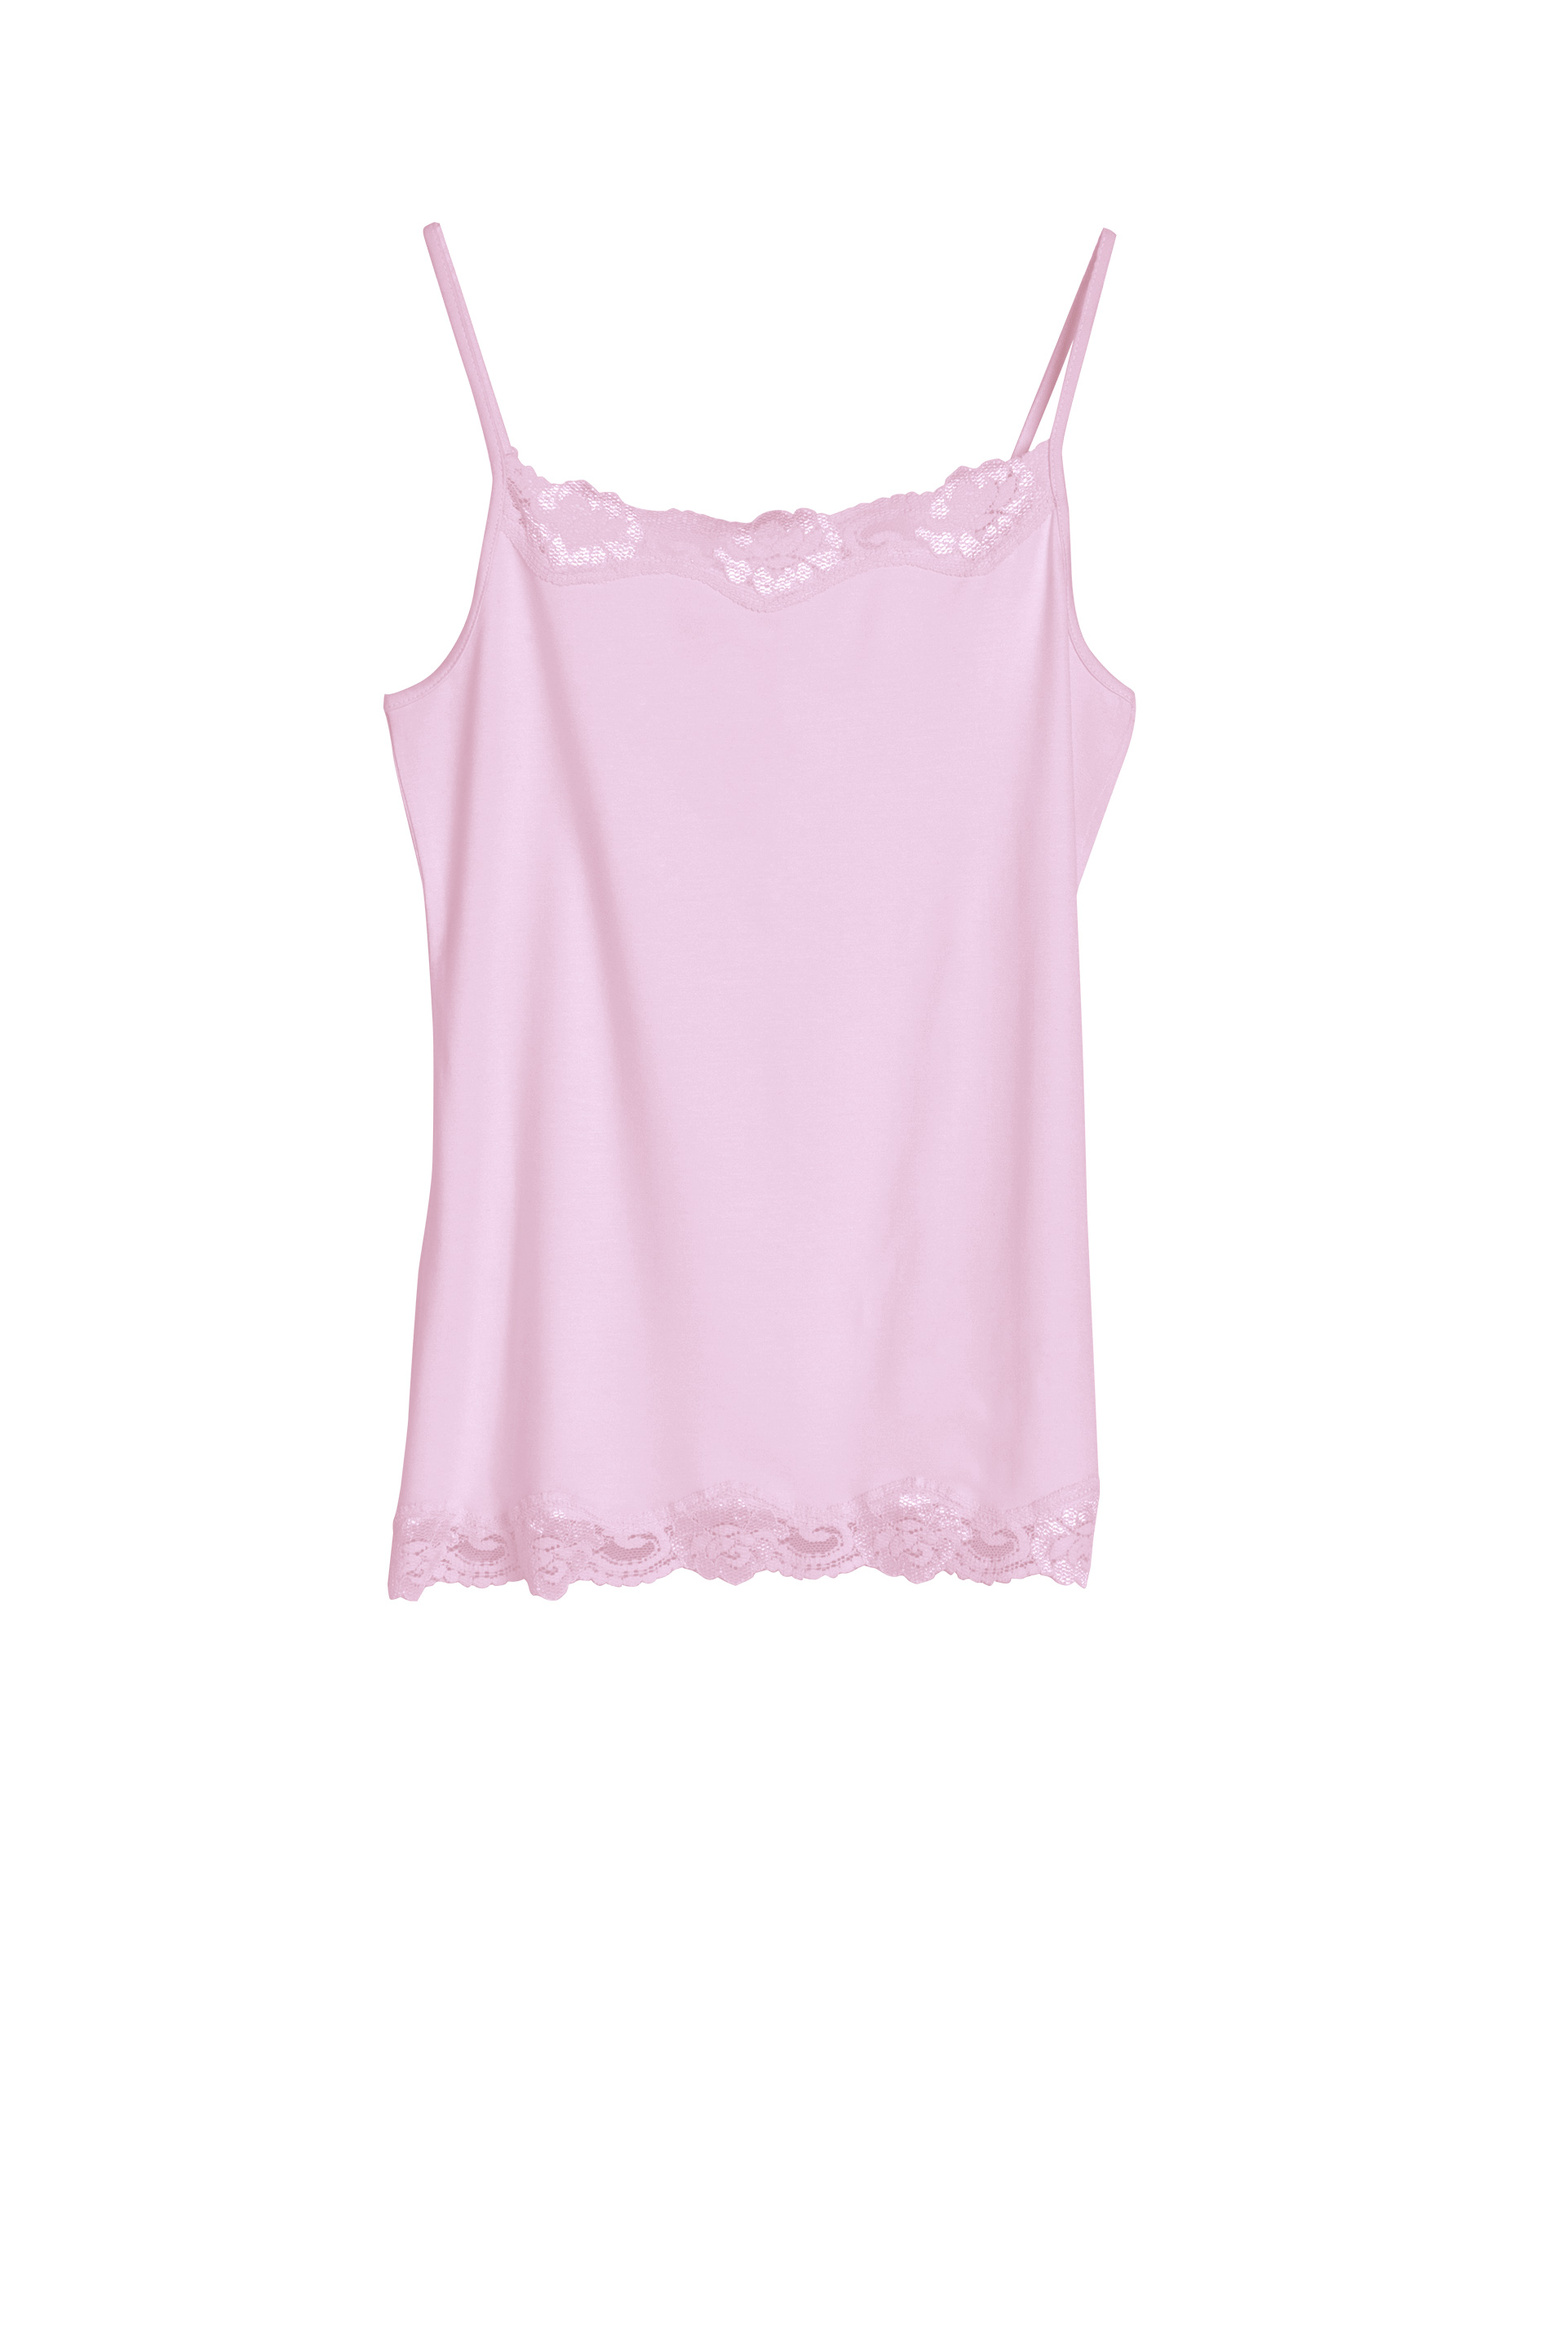 7200_lace_camisole_lilac_pink.jpg